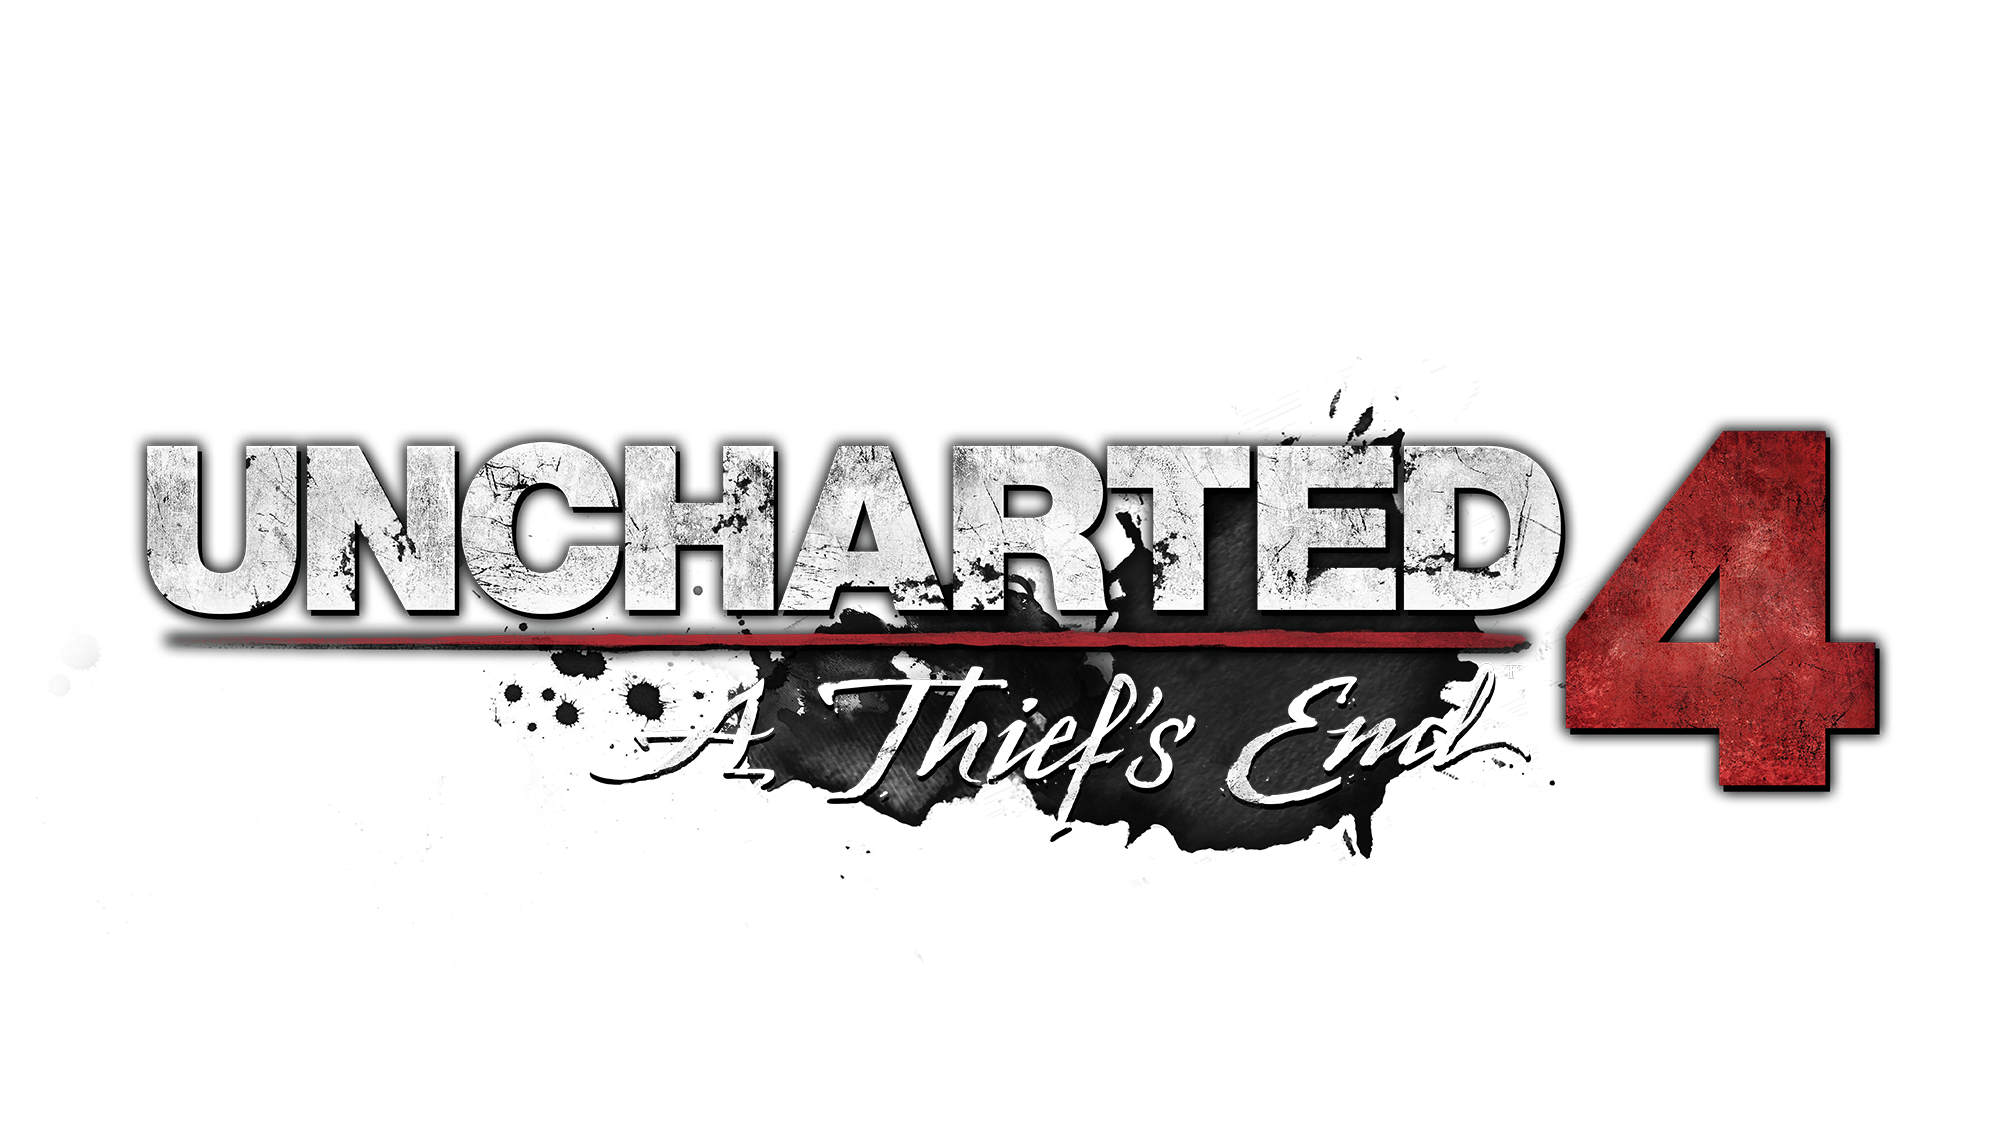 Poll: Have you started playing Uncharted 4 yet?